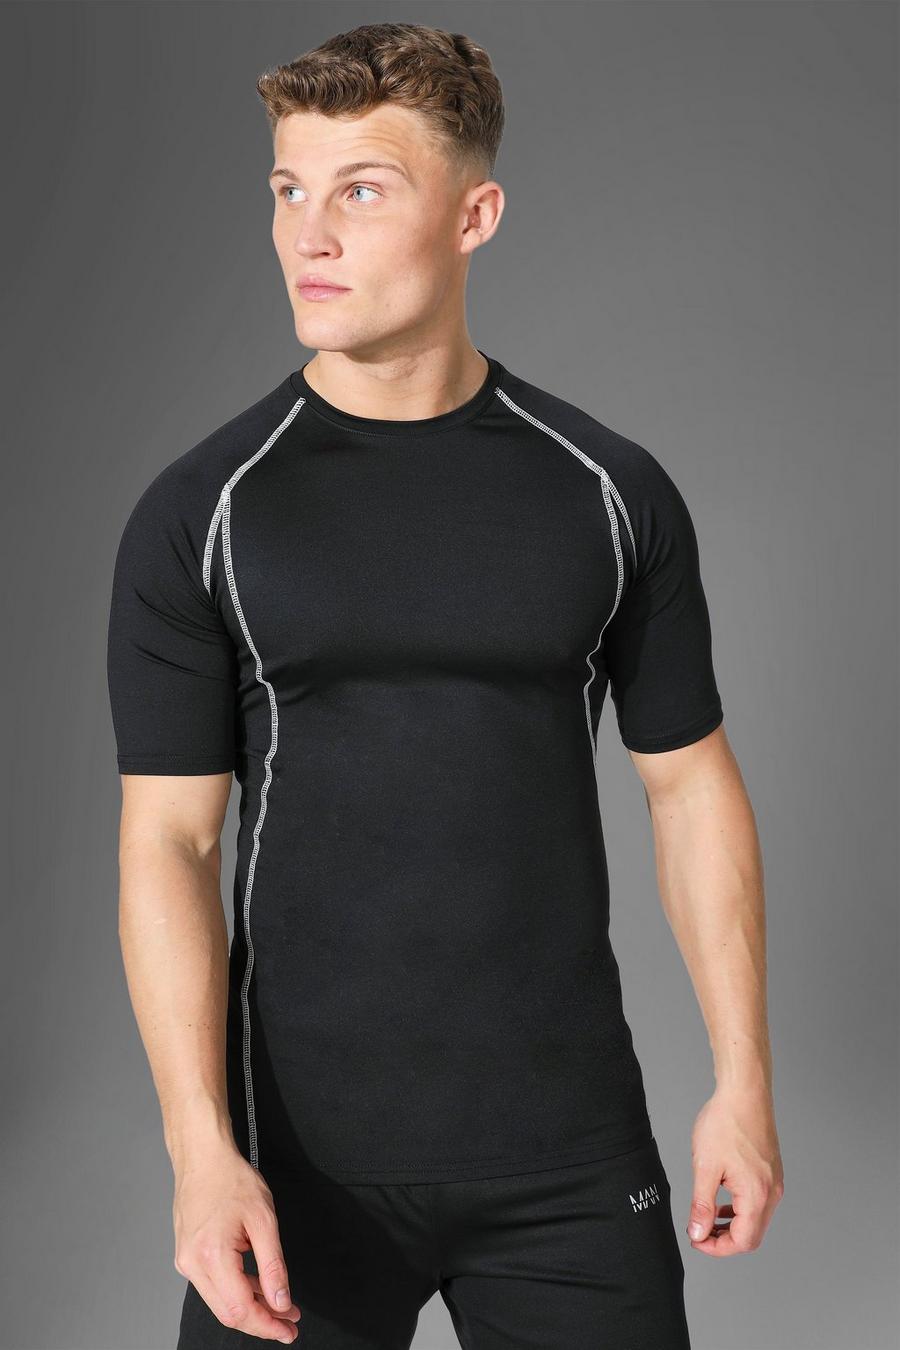 T-shirt Man Active Gym a compressione, Black negro image number 1